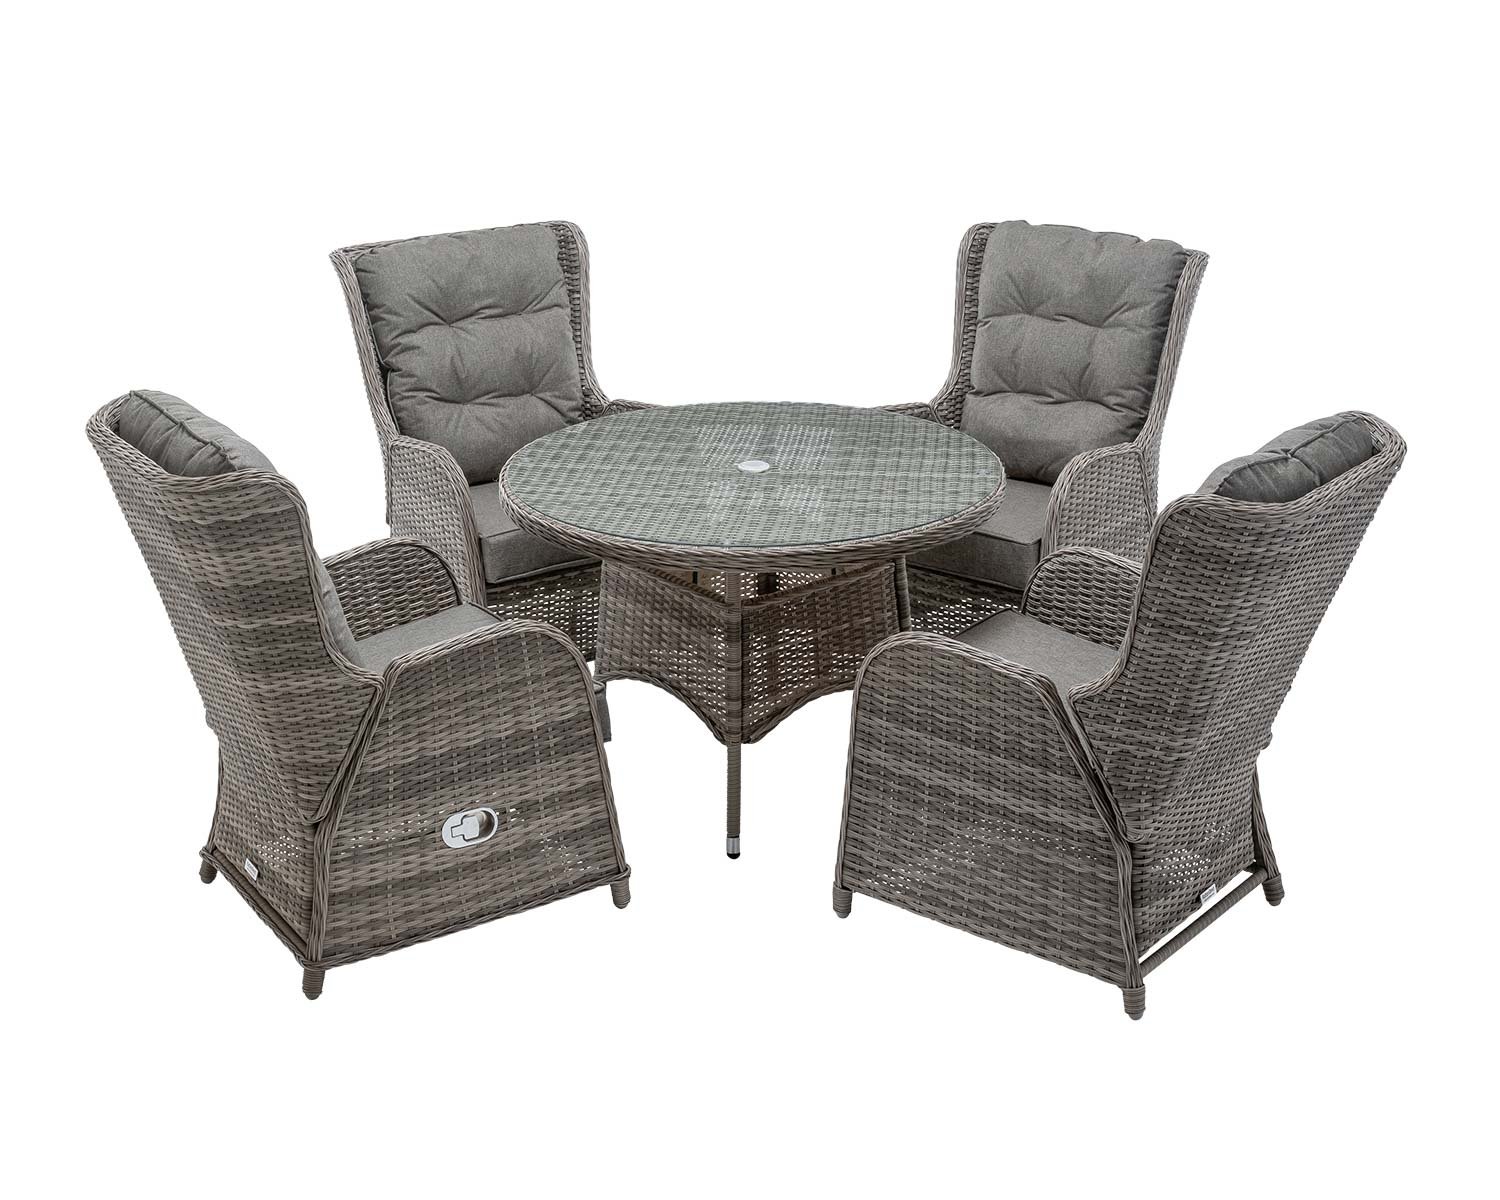 Fiji 4 Reclining Rattan Garden Dining Chairs Round Table In Grey